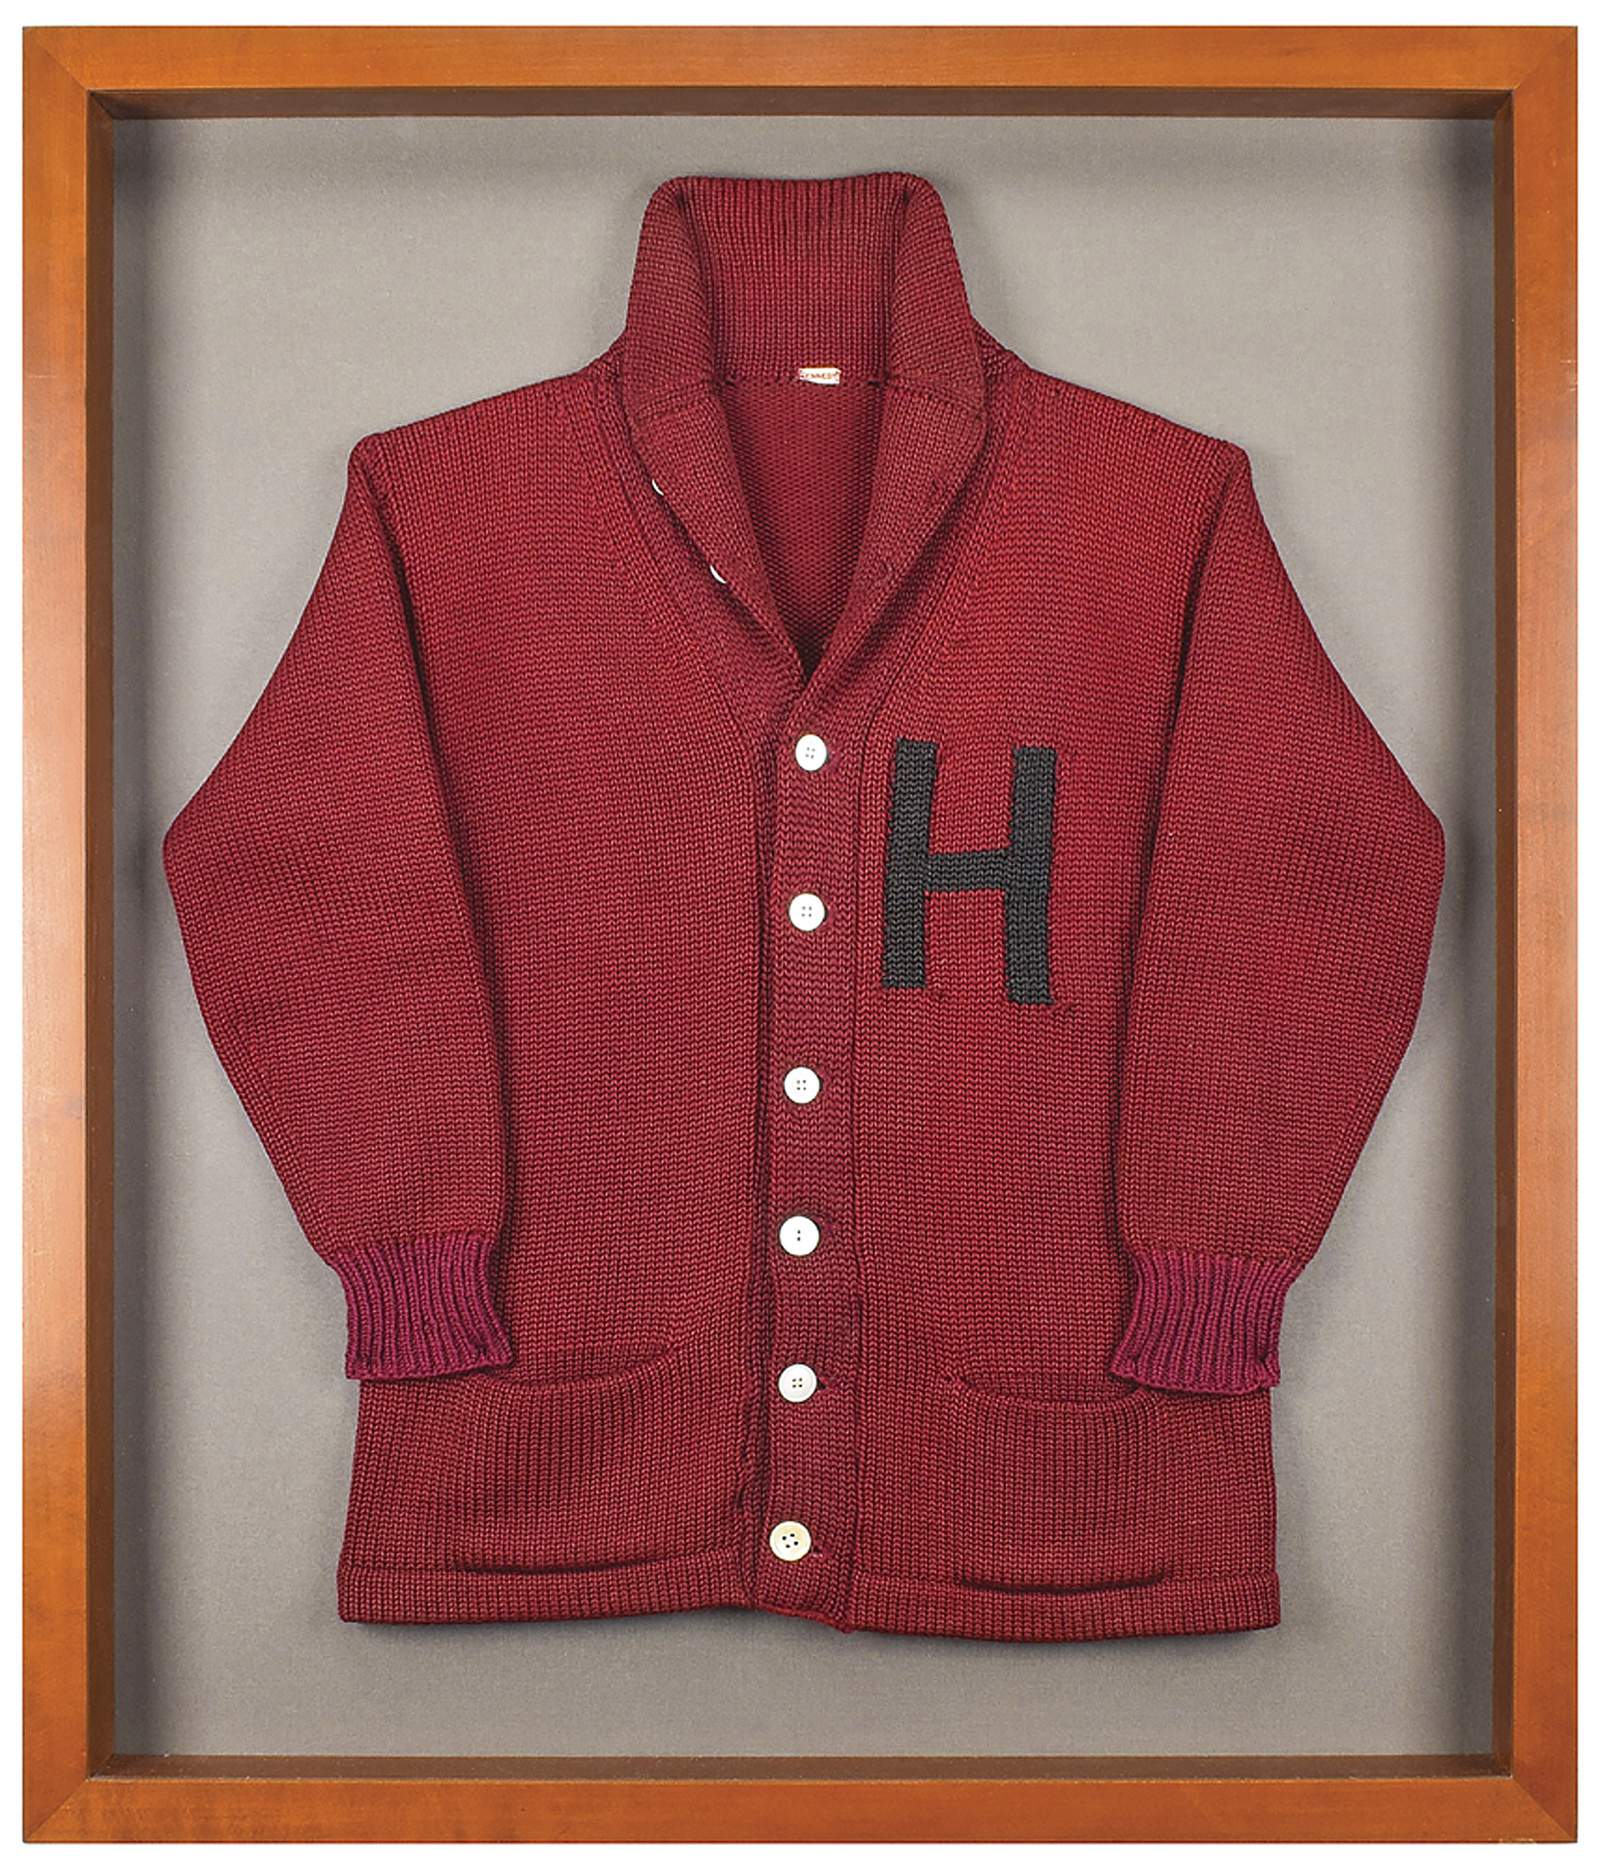 JFK's Harvard sweater sold at auction for more than $85,000